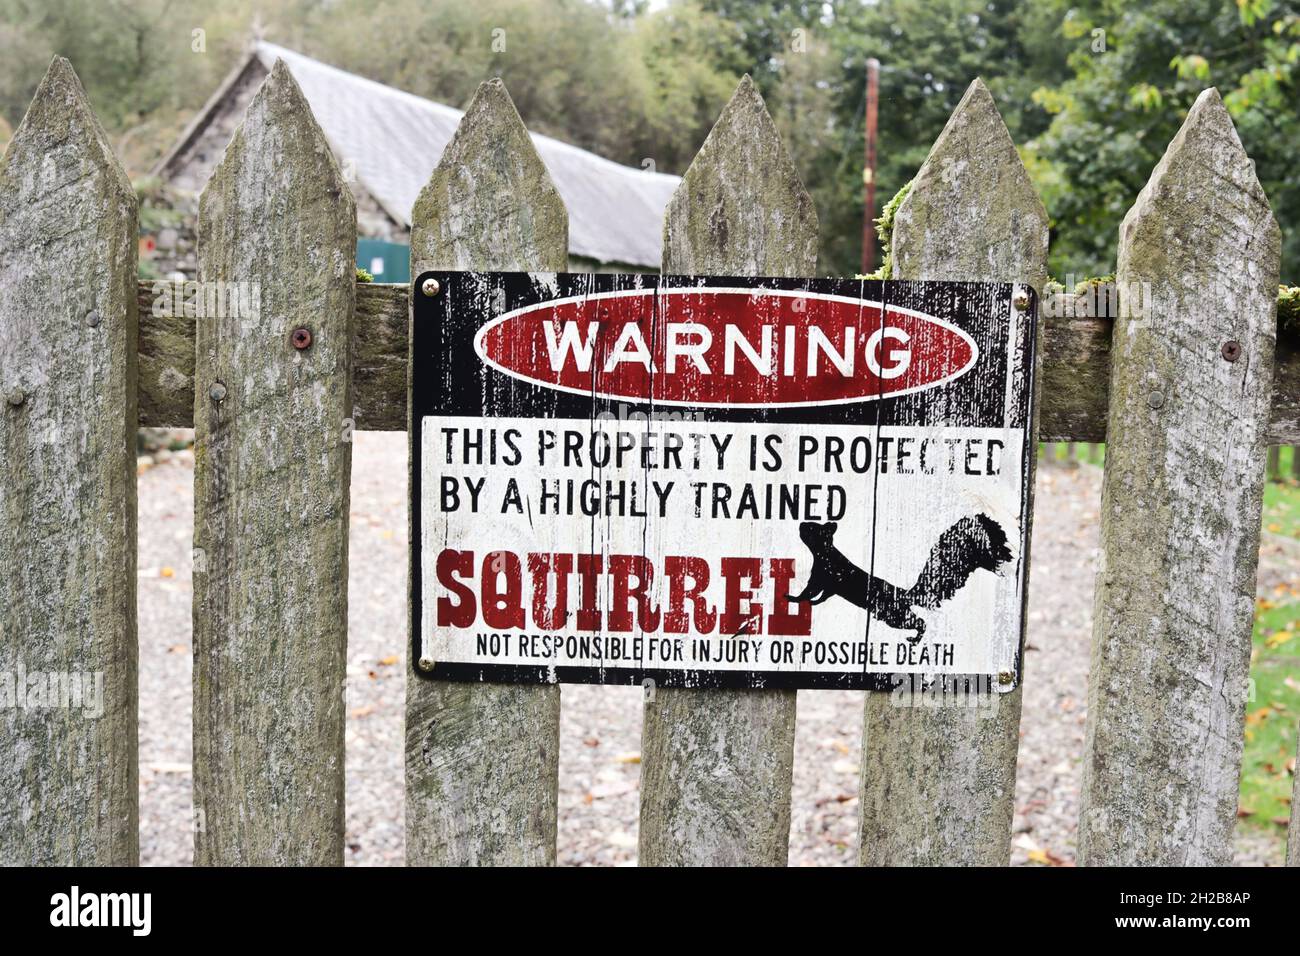 Squirrel warning in Scotland. Sign on a wooden fence. Stock Photo